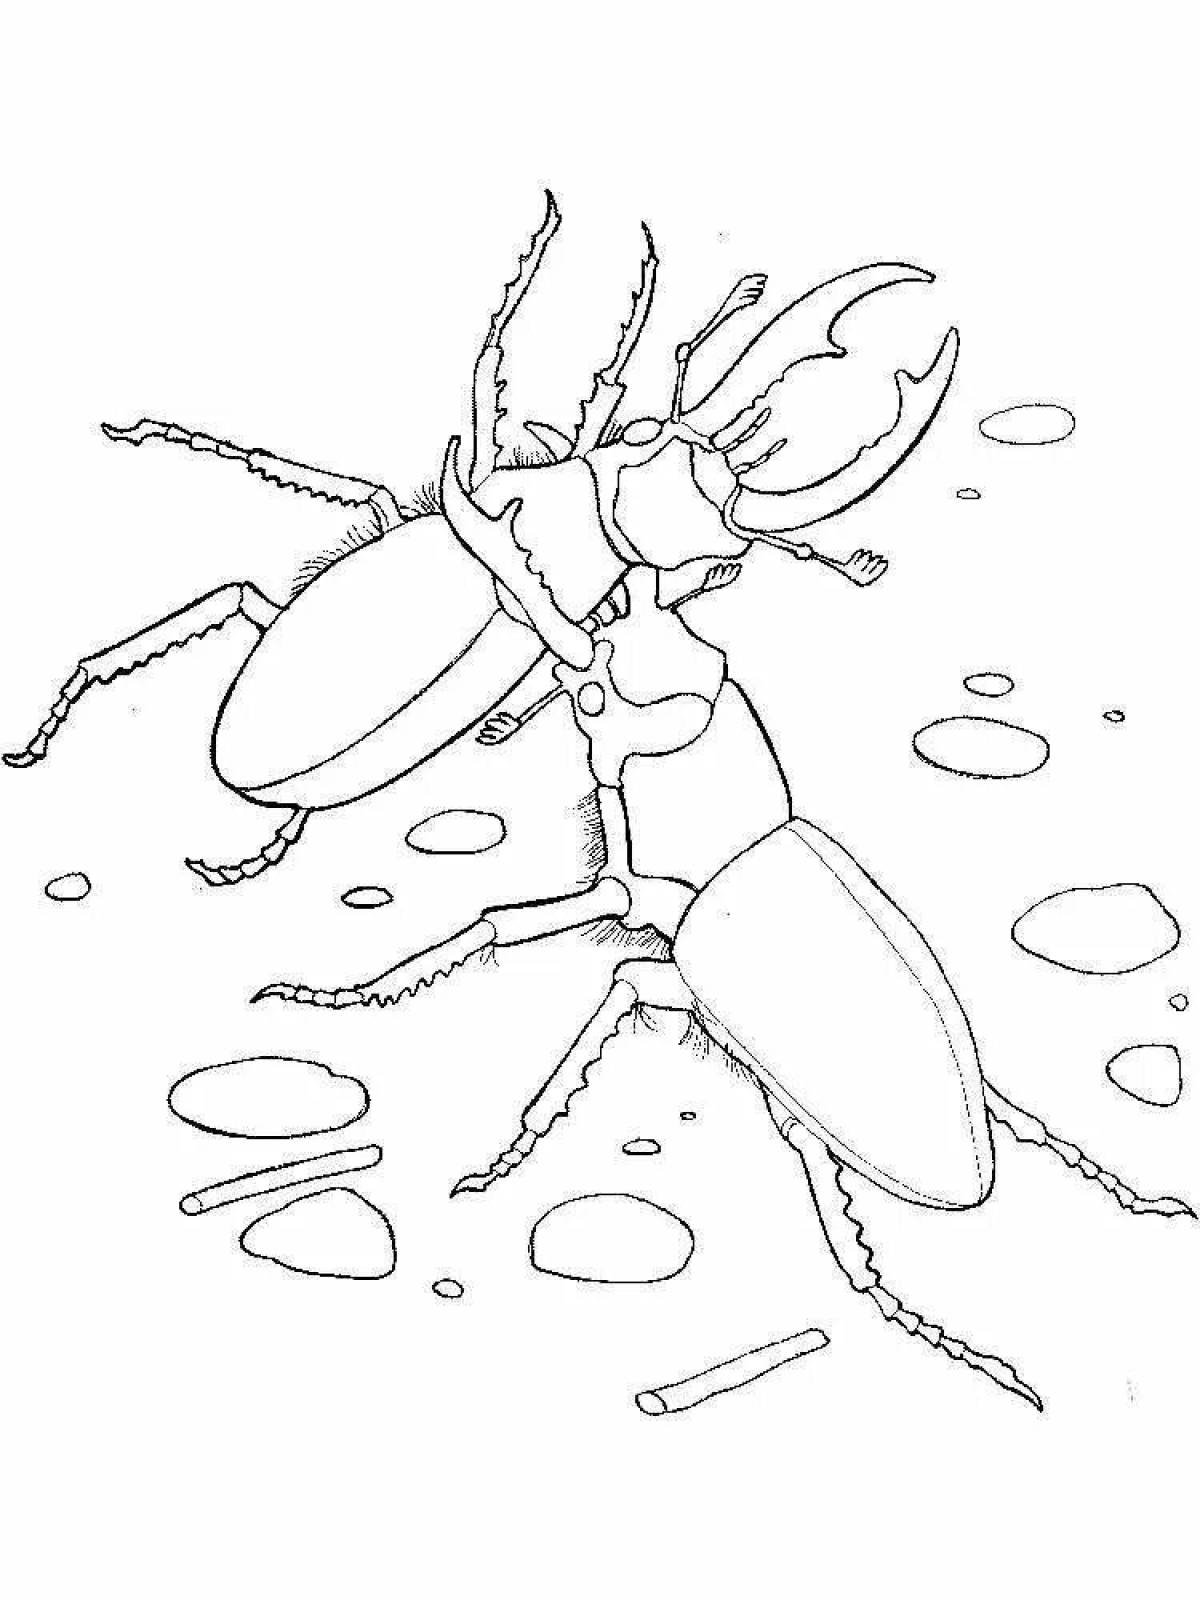 Majestic stag beetle coloring book